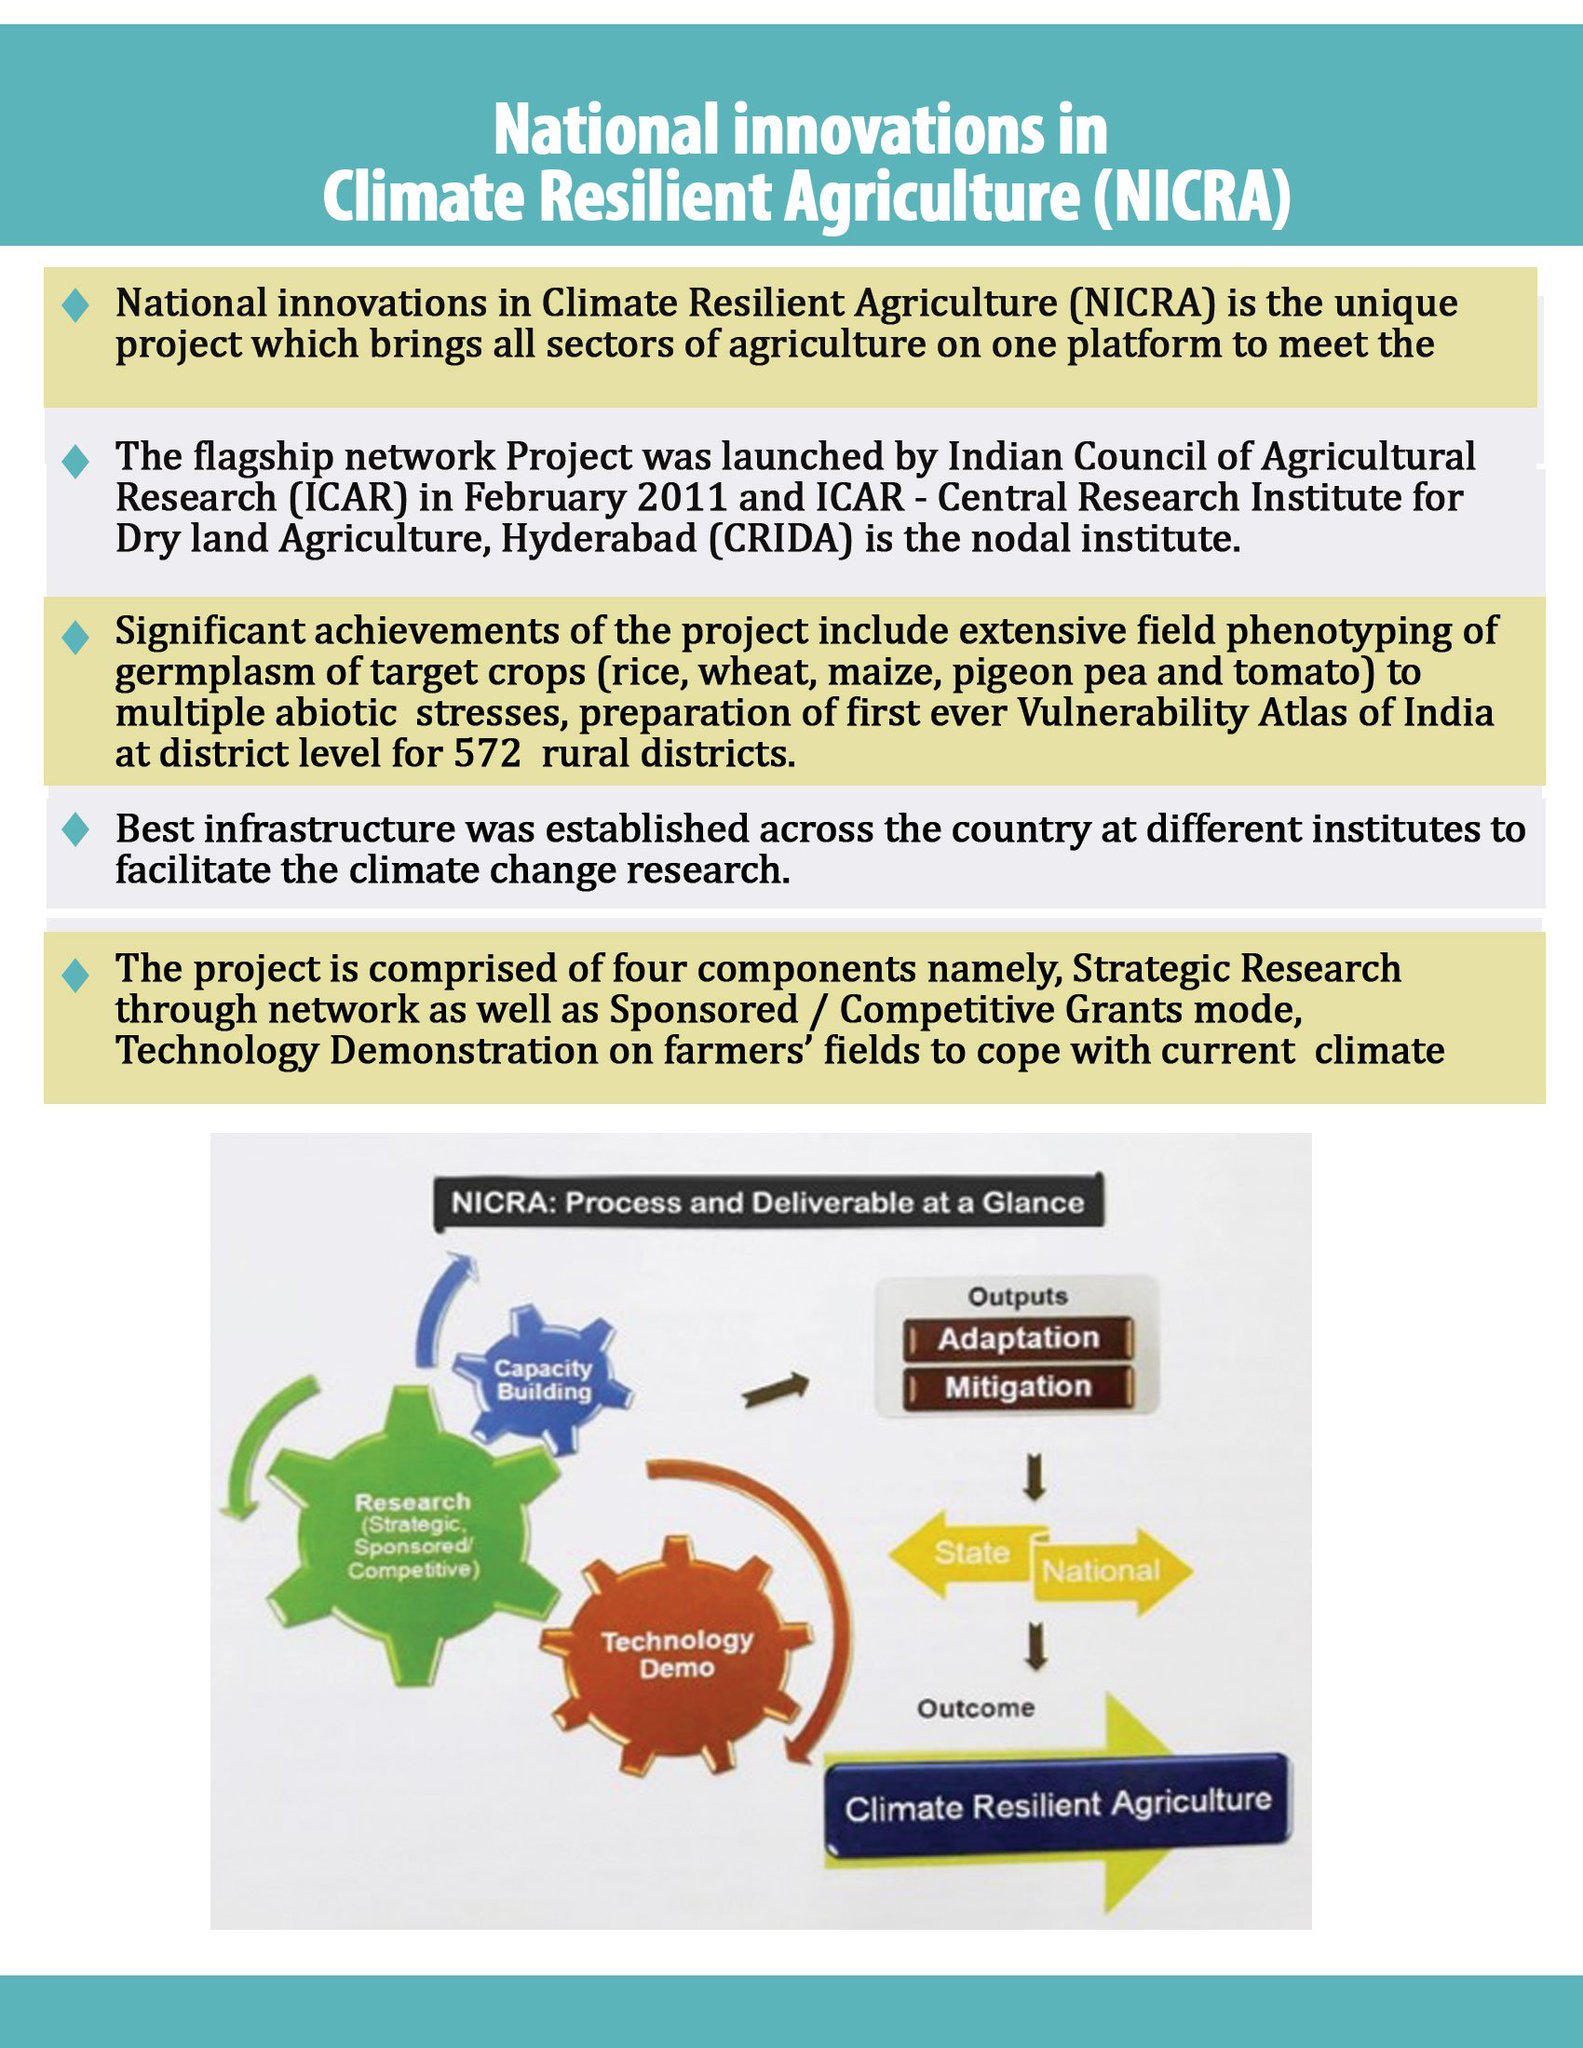 National Innovation on Climate Resilient Agriculture